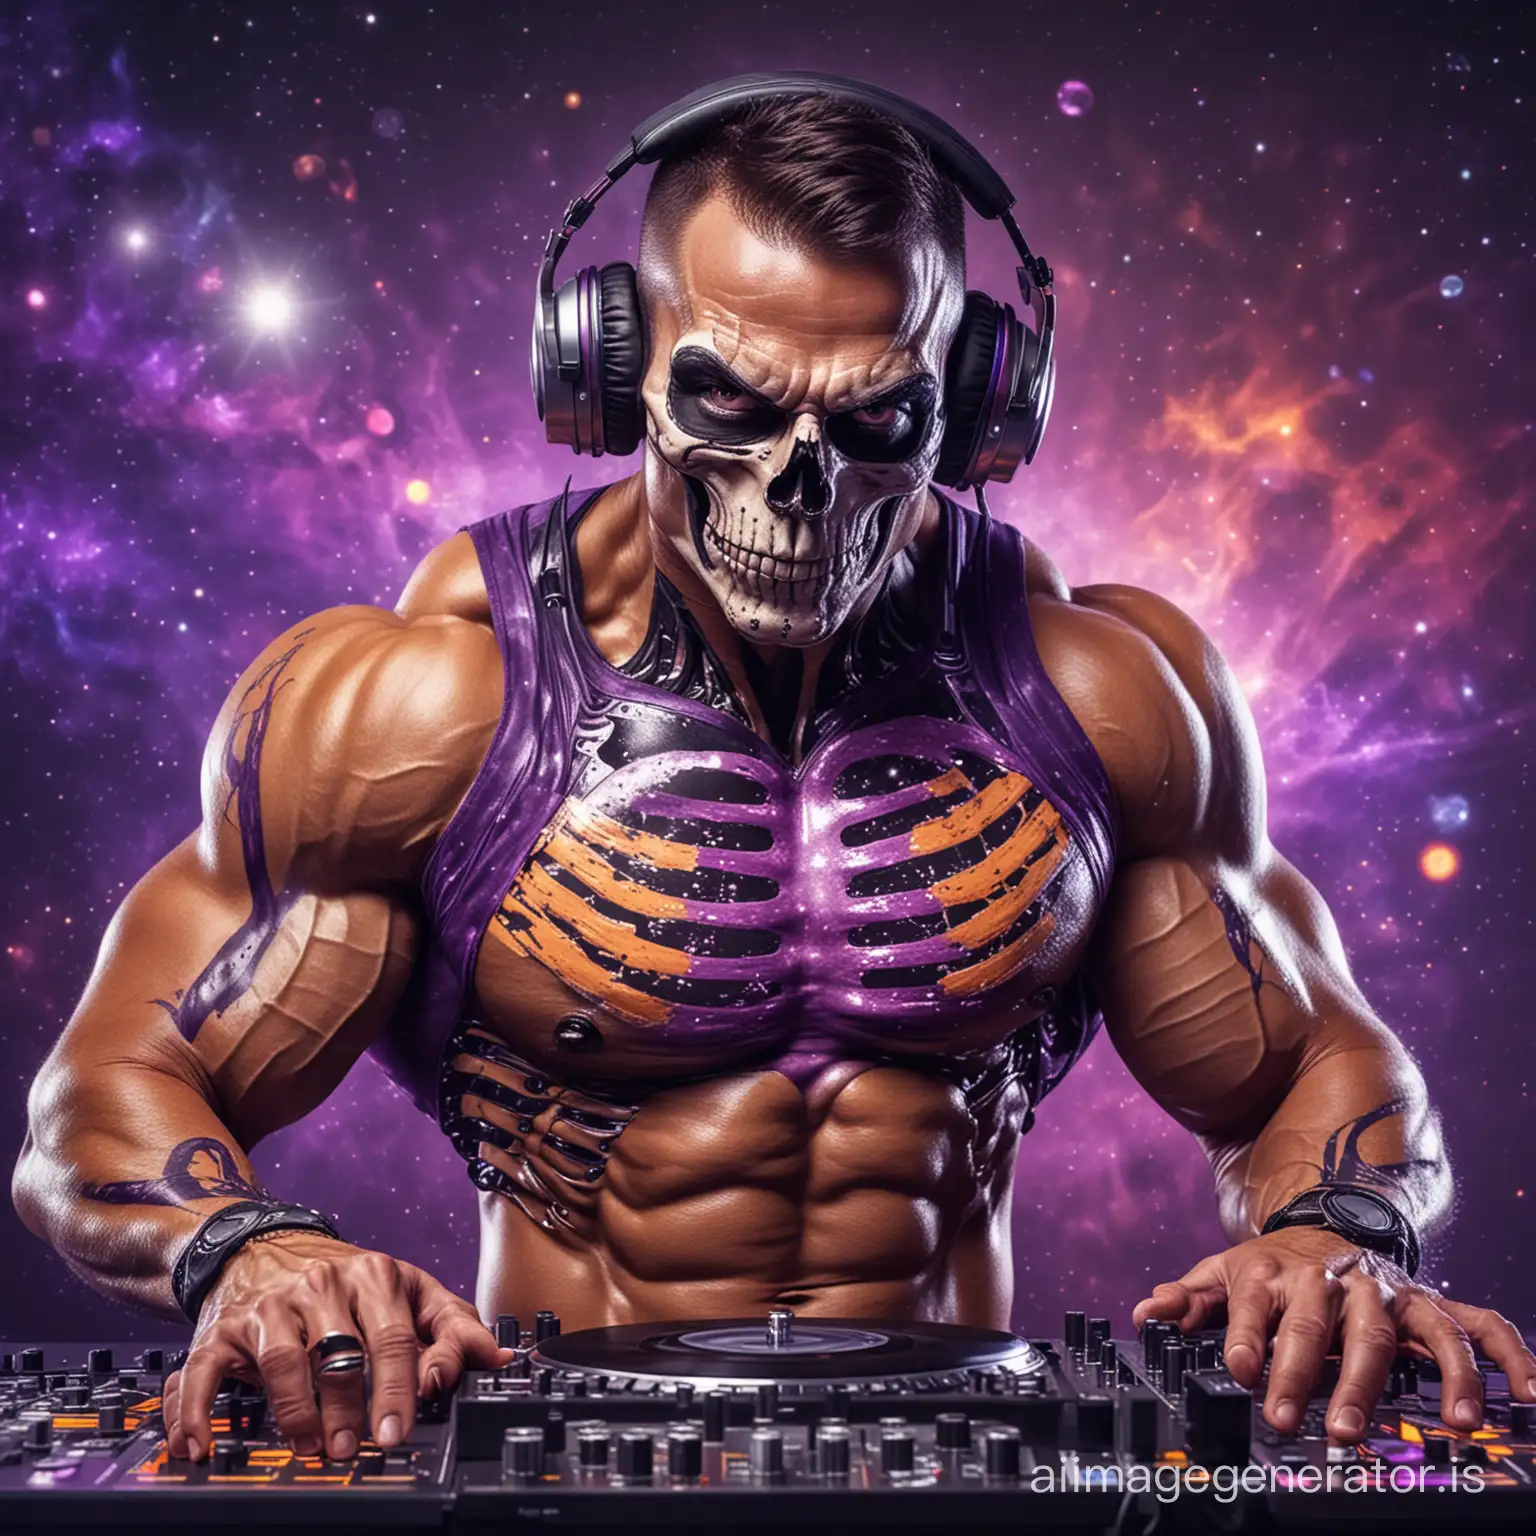 Muscular-Bodybuilder-DJ-in-Skeleton-Face-at-a-Space-Disco-with-Precise-Beat-Mixing-in-Purple-and-Orange